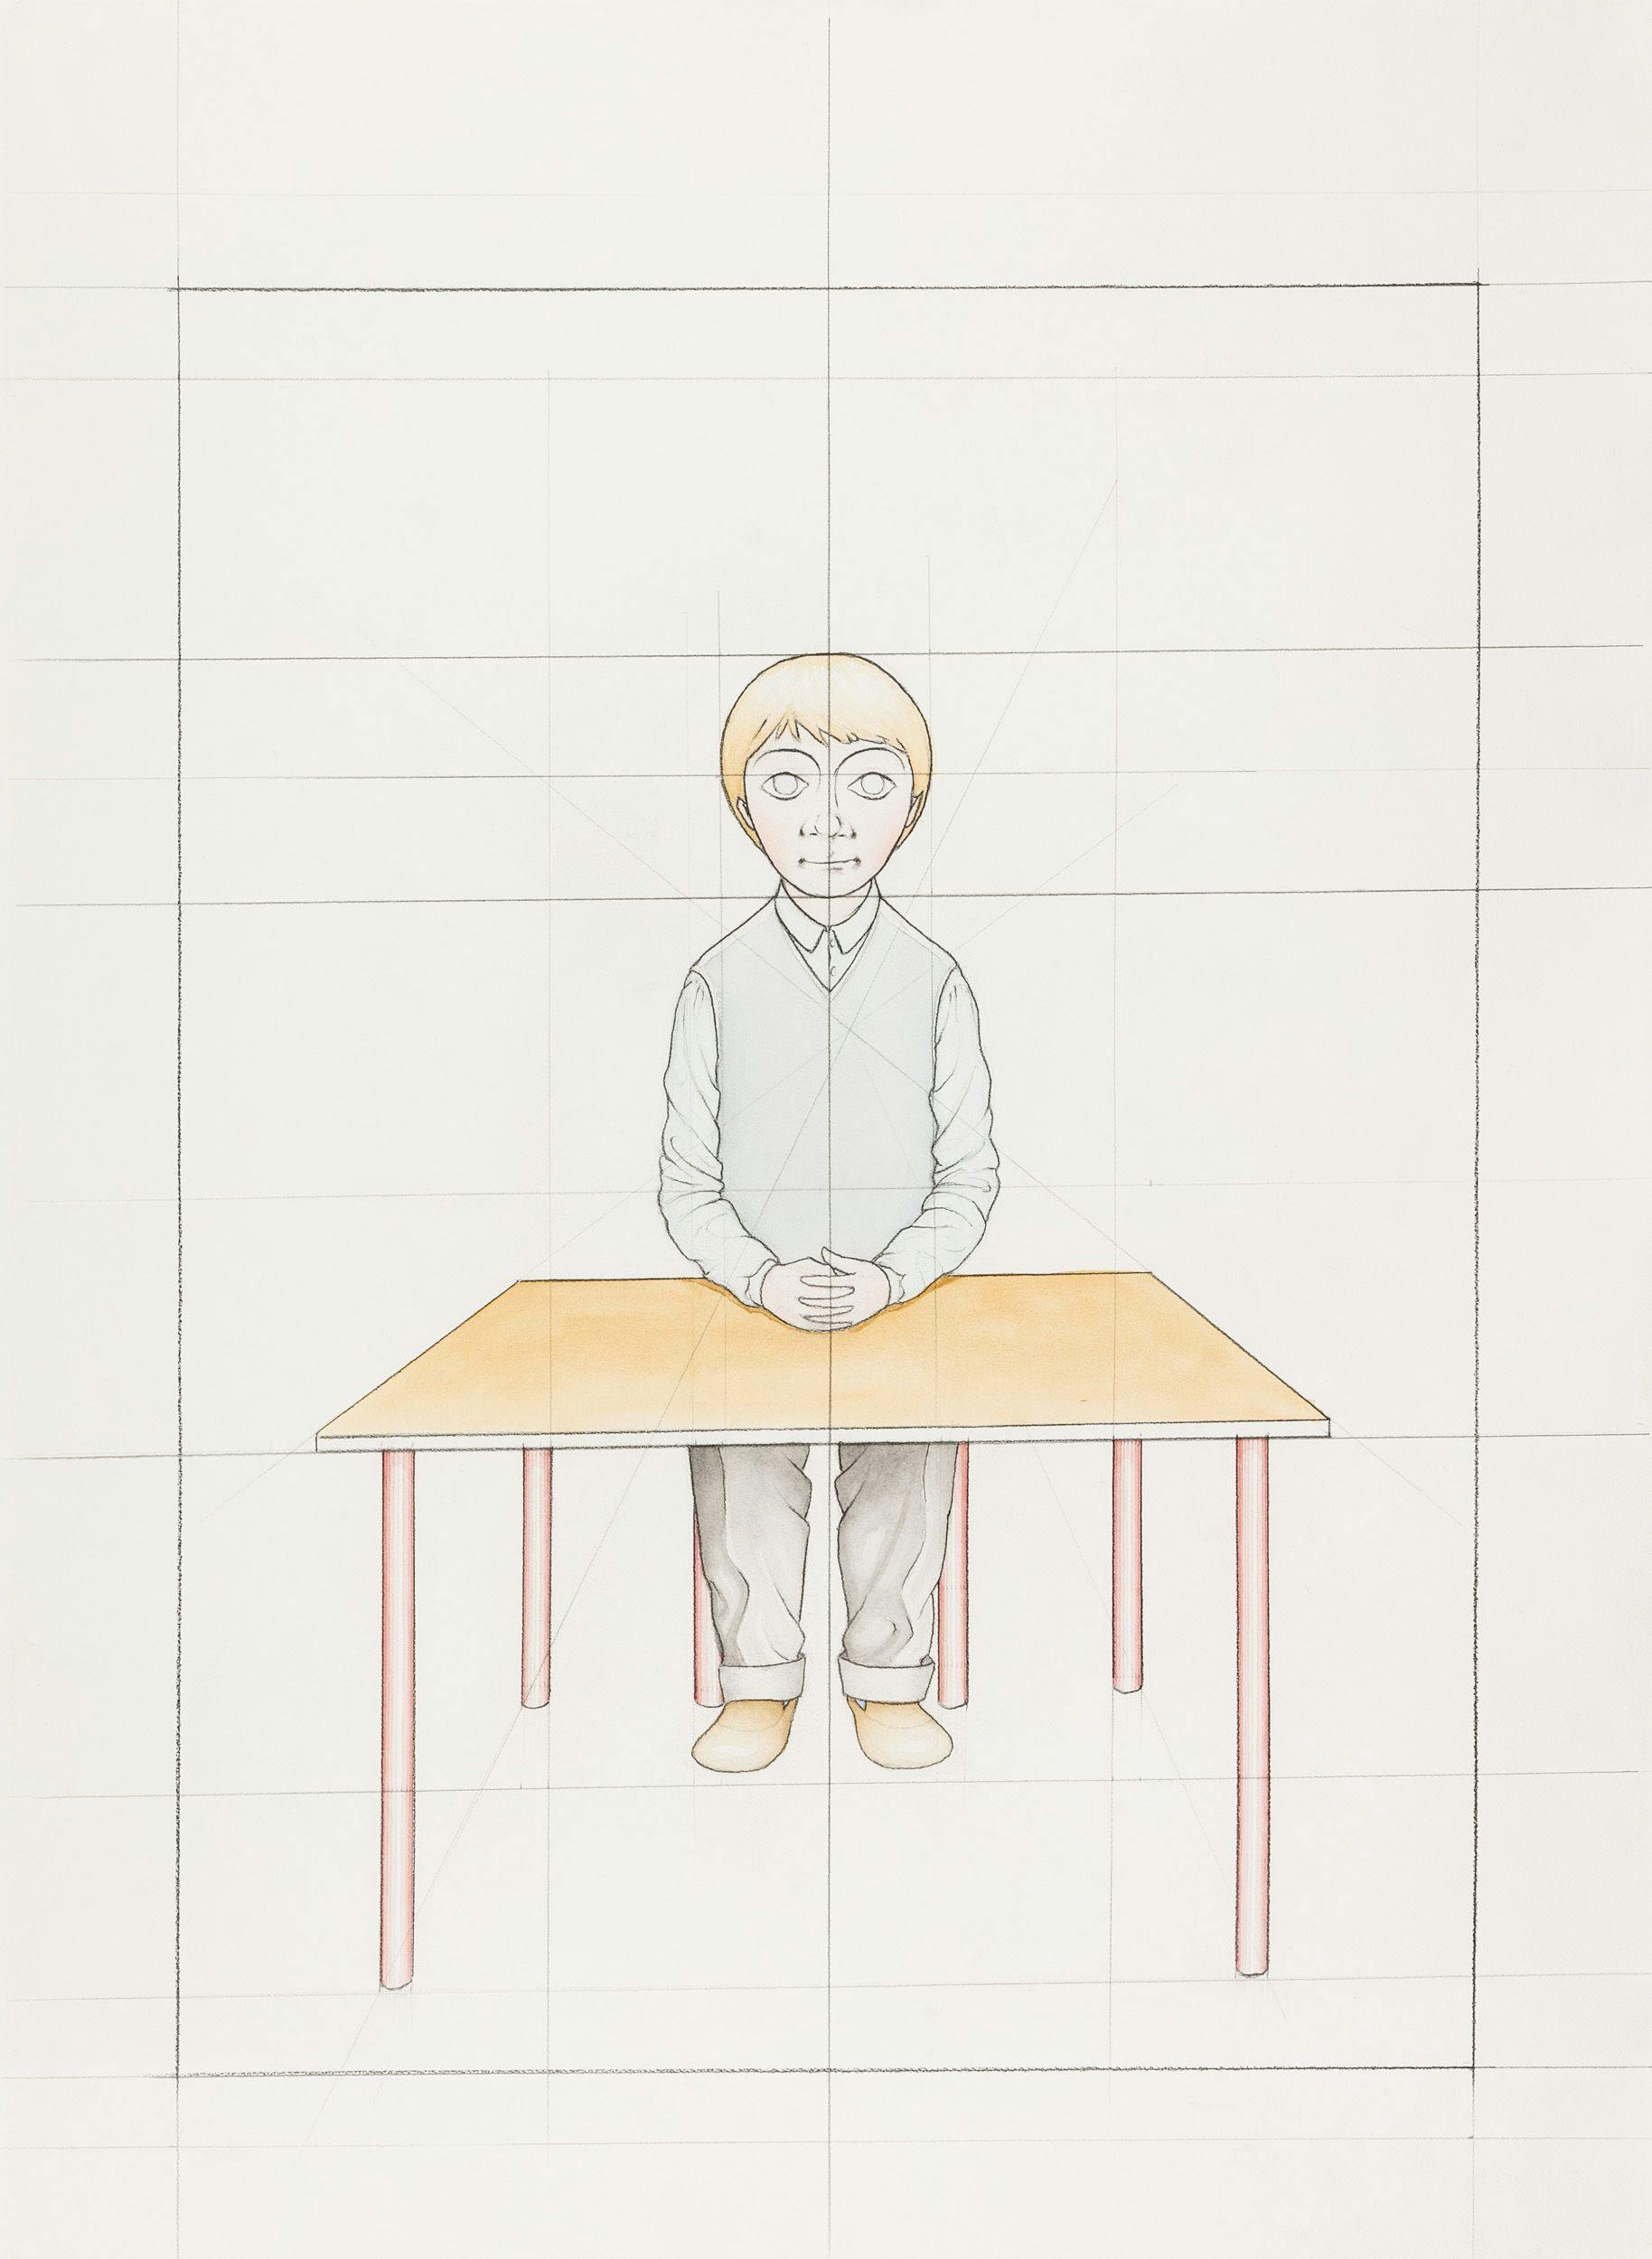 Artwork: Peter Land, An Attempt to Reconstruct my Primary School Class from Memory (16) work in progress, 2012